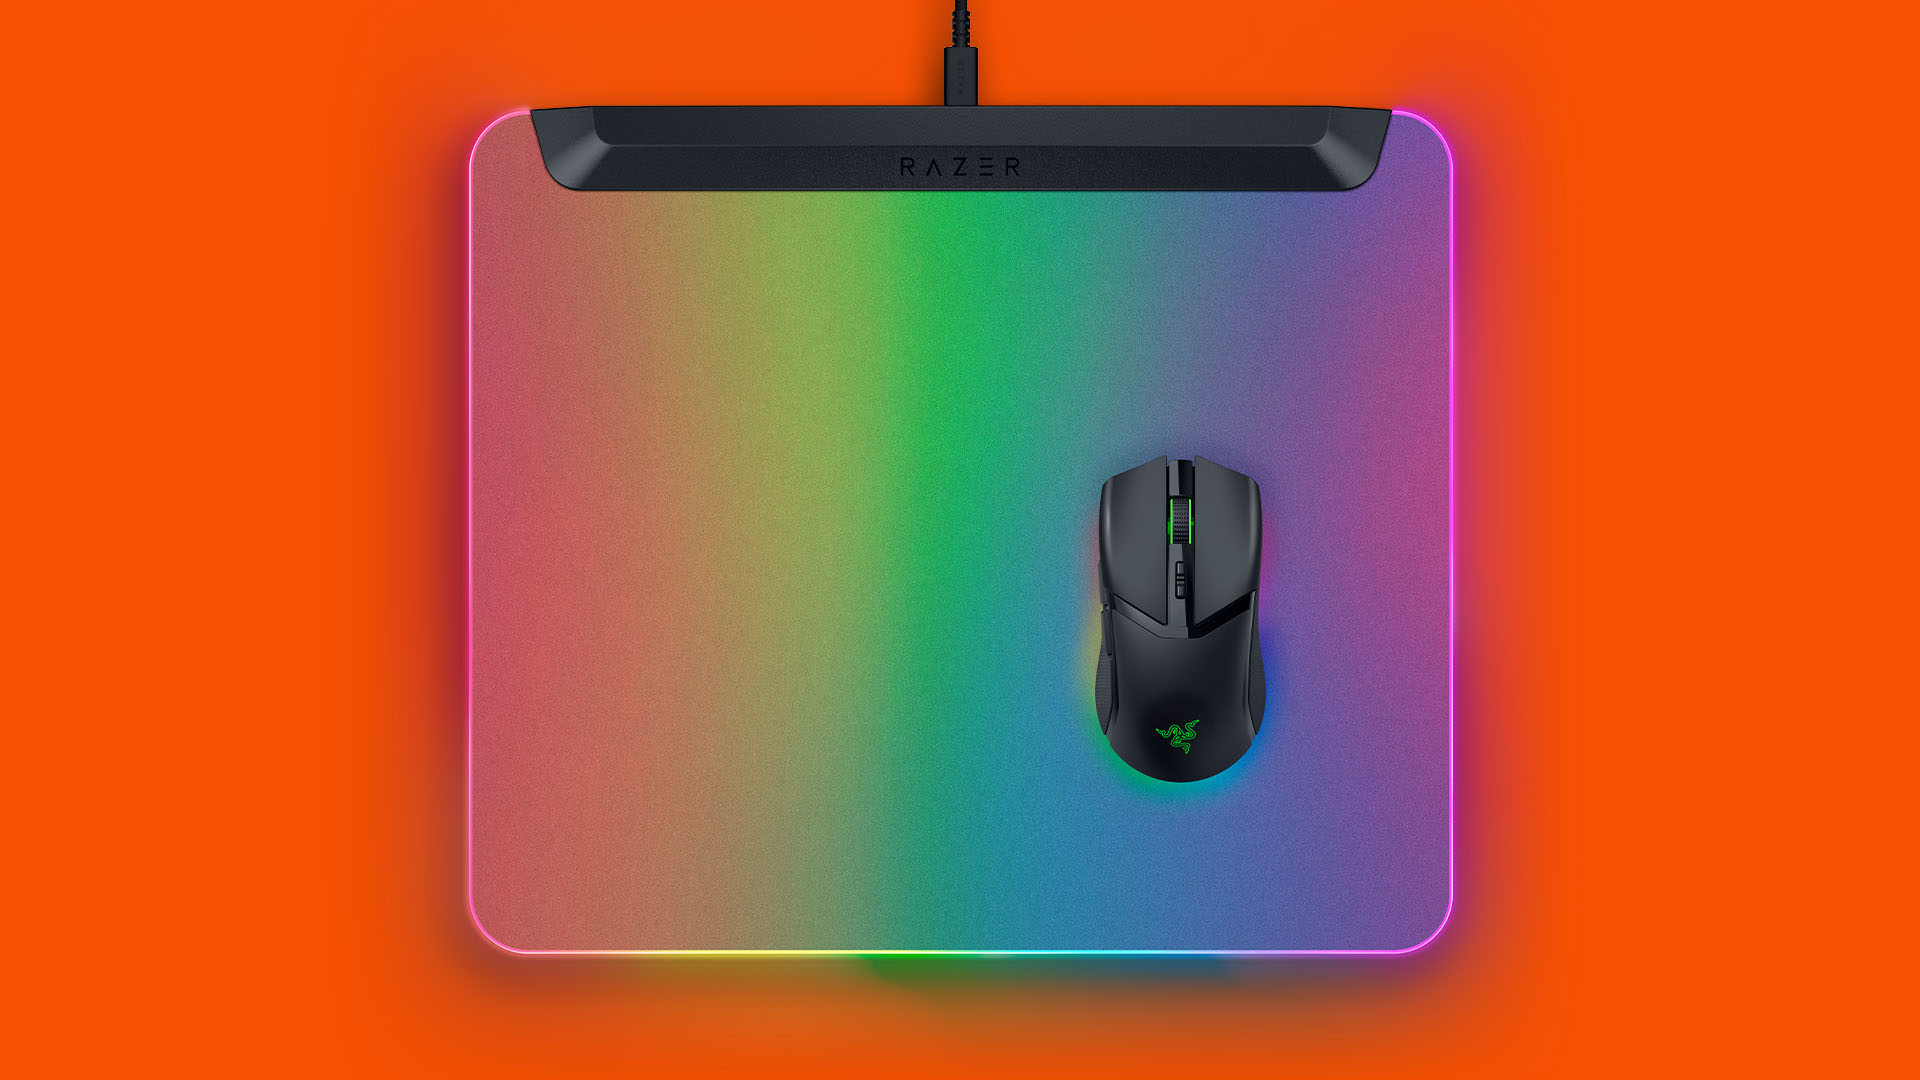 Razer's new mouse pad is a world first for the silliest reason